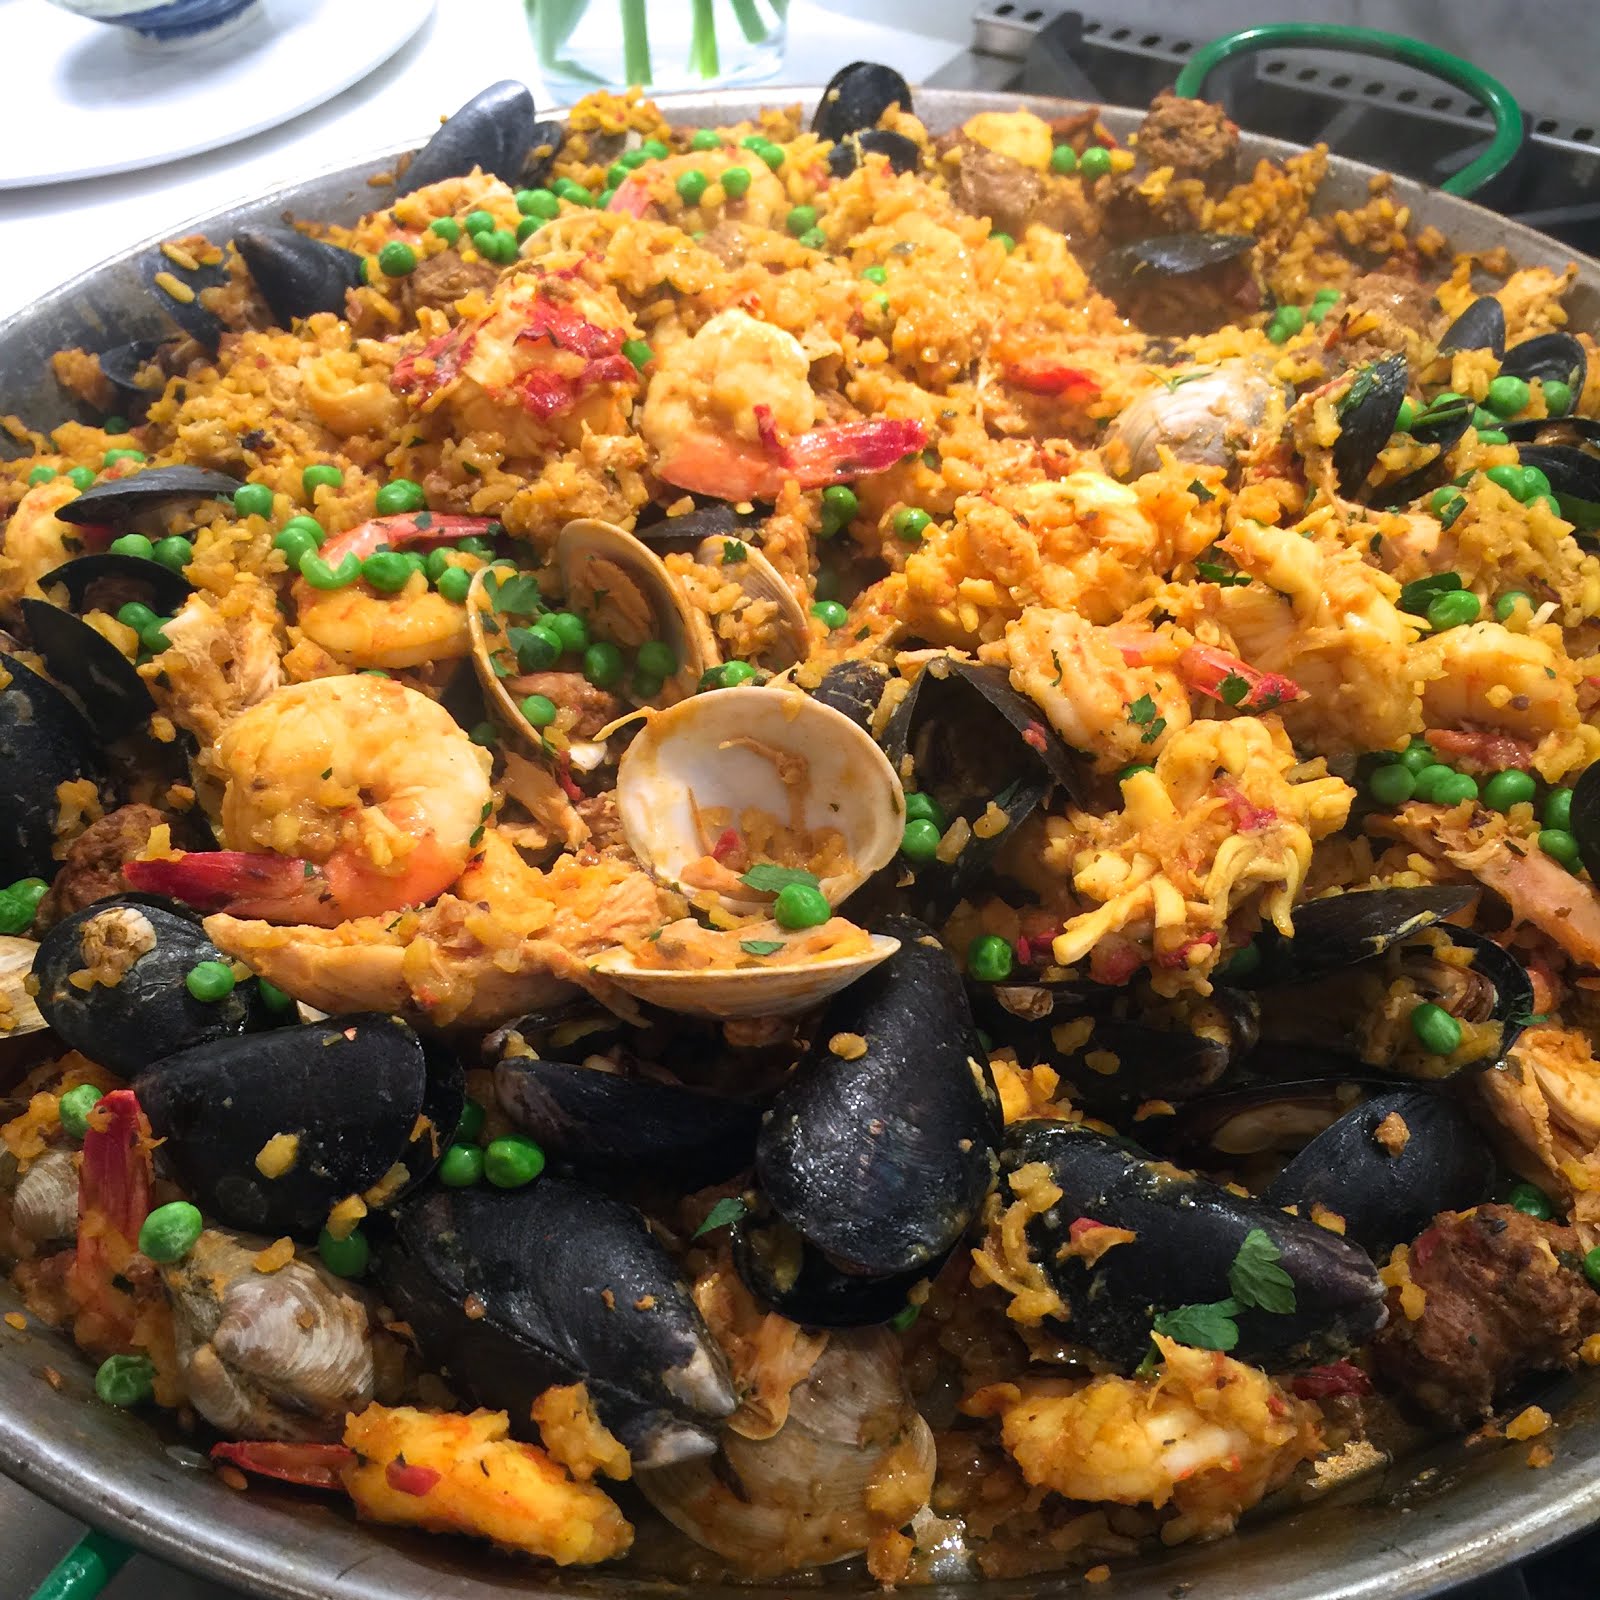 Gourmet Girl: Seafood Paella a la Valenciana - Dinner Party